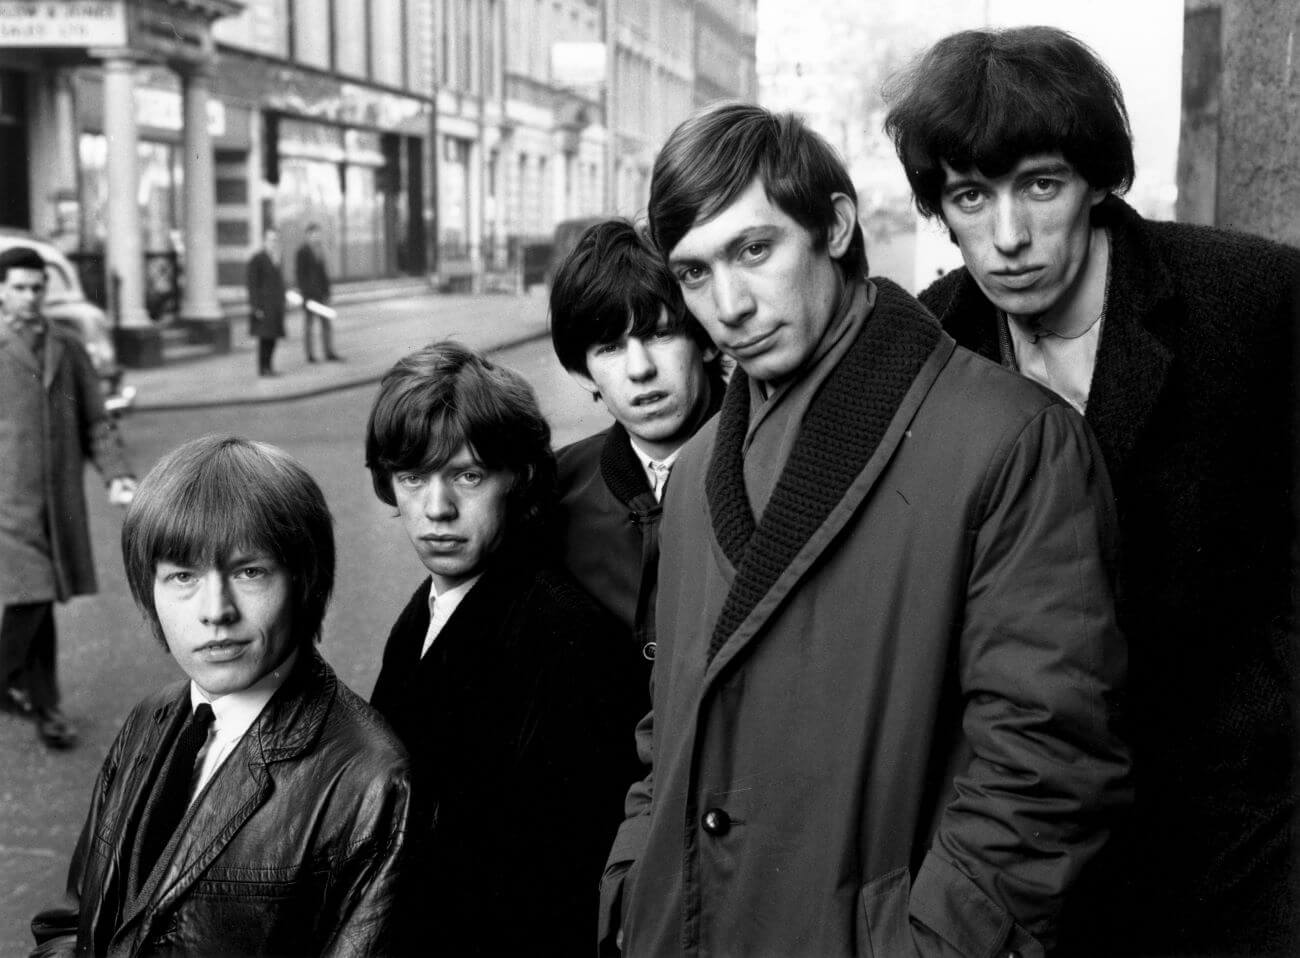 A black and white picture of Brian Jones, Mick Jagger, Keith Richards, Charlie Watts, and Bill Wyman of The Rolling Stones posing on a street corner.